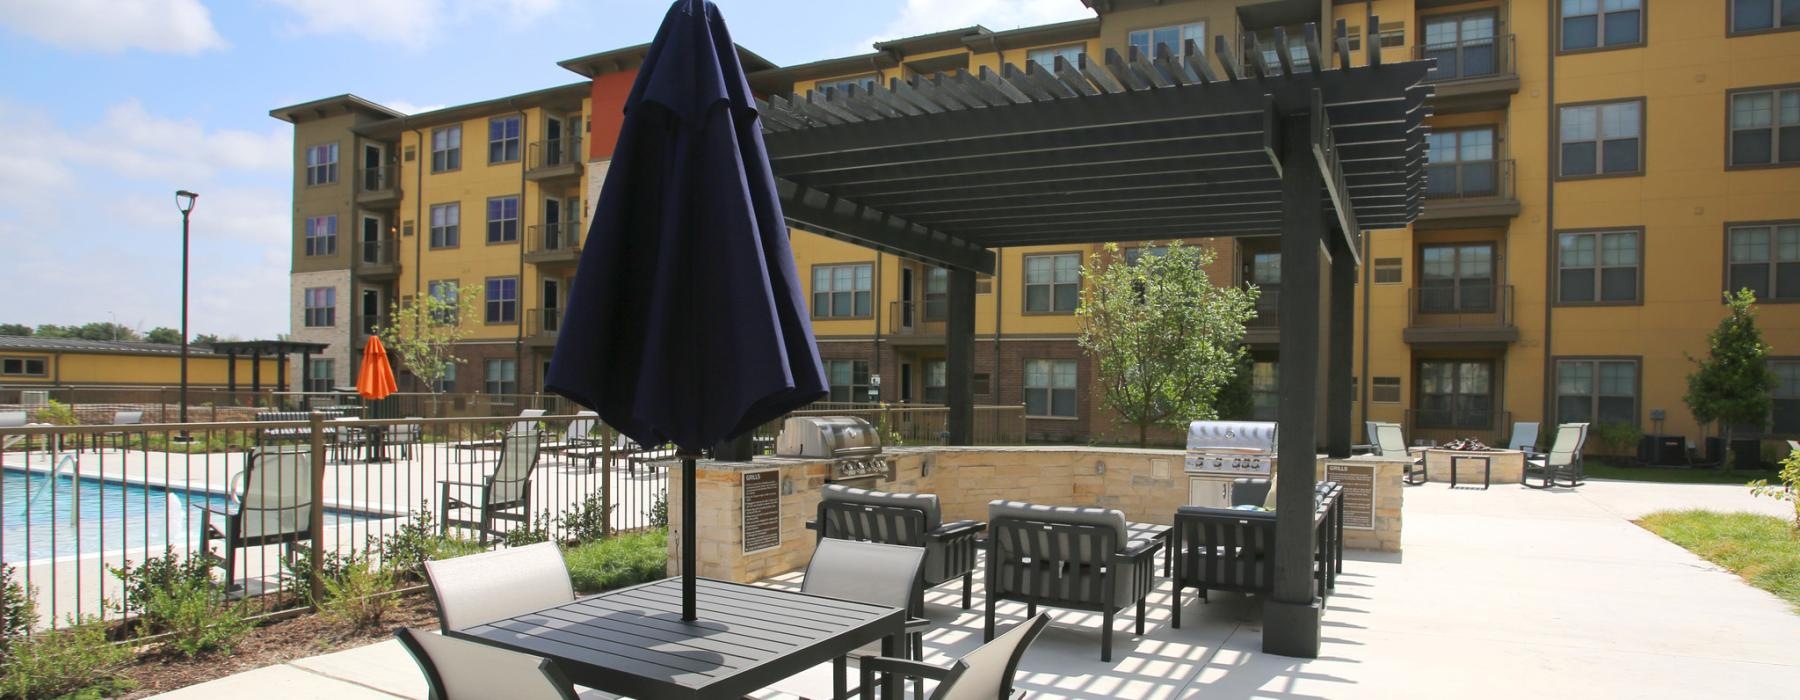 a patio with tables and chairs and umbrellas by a building